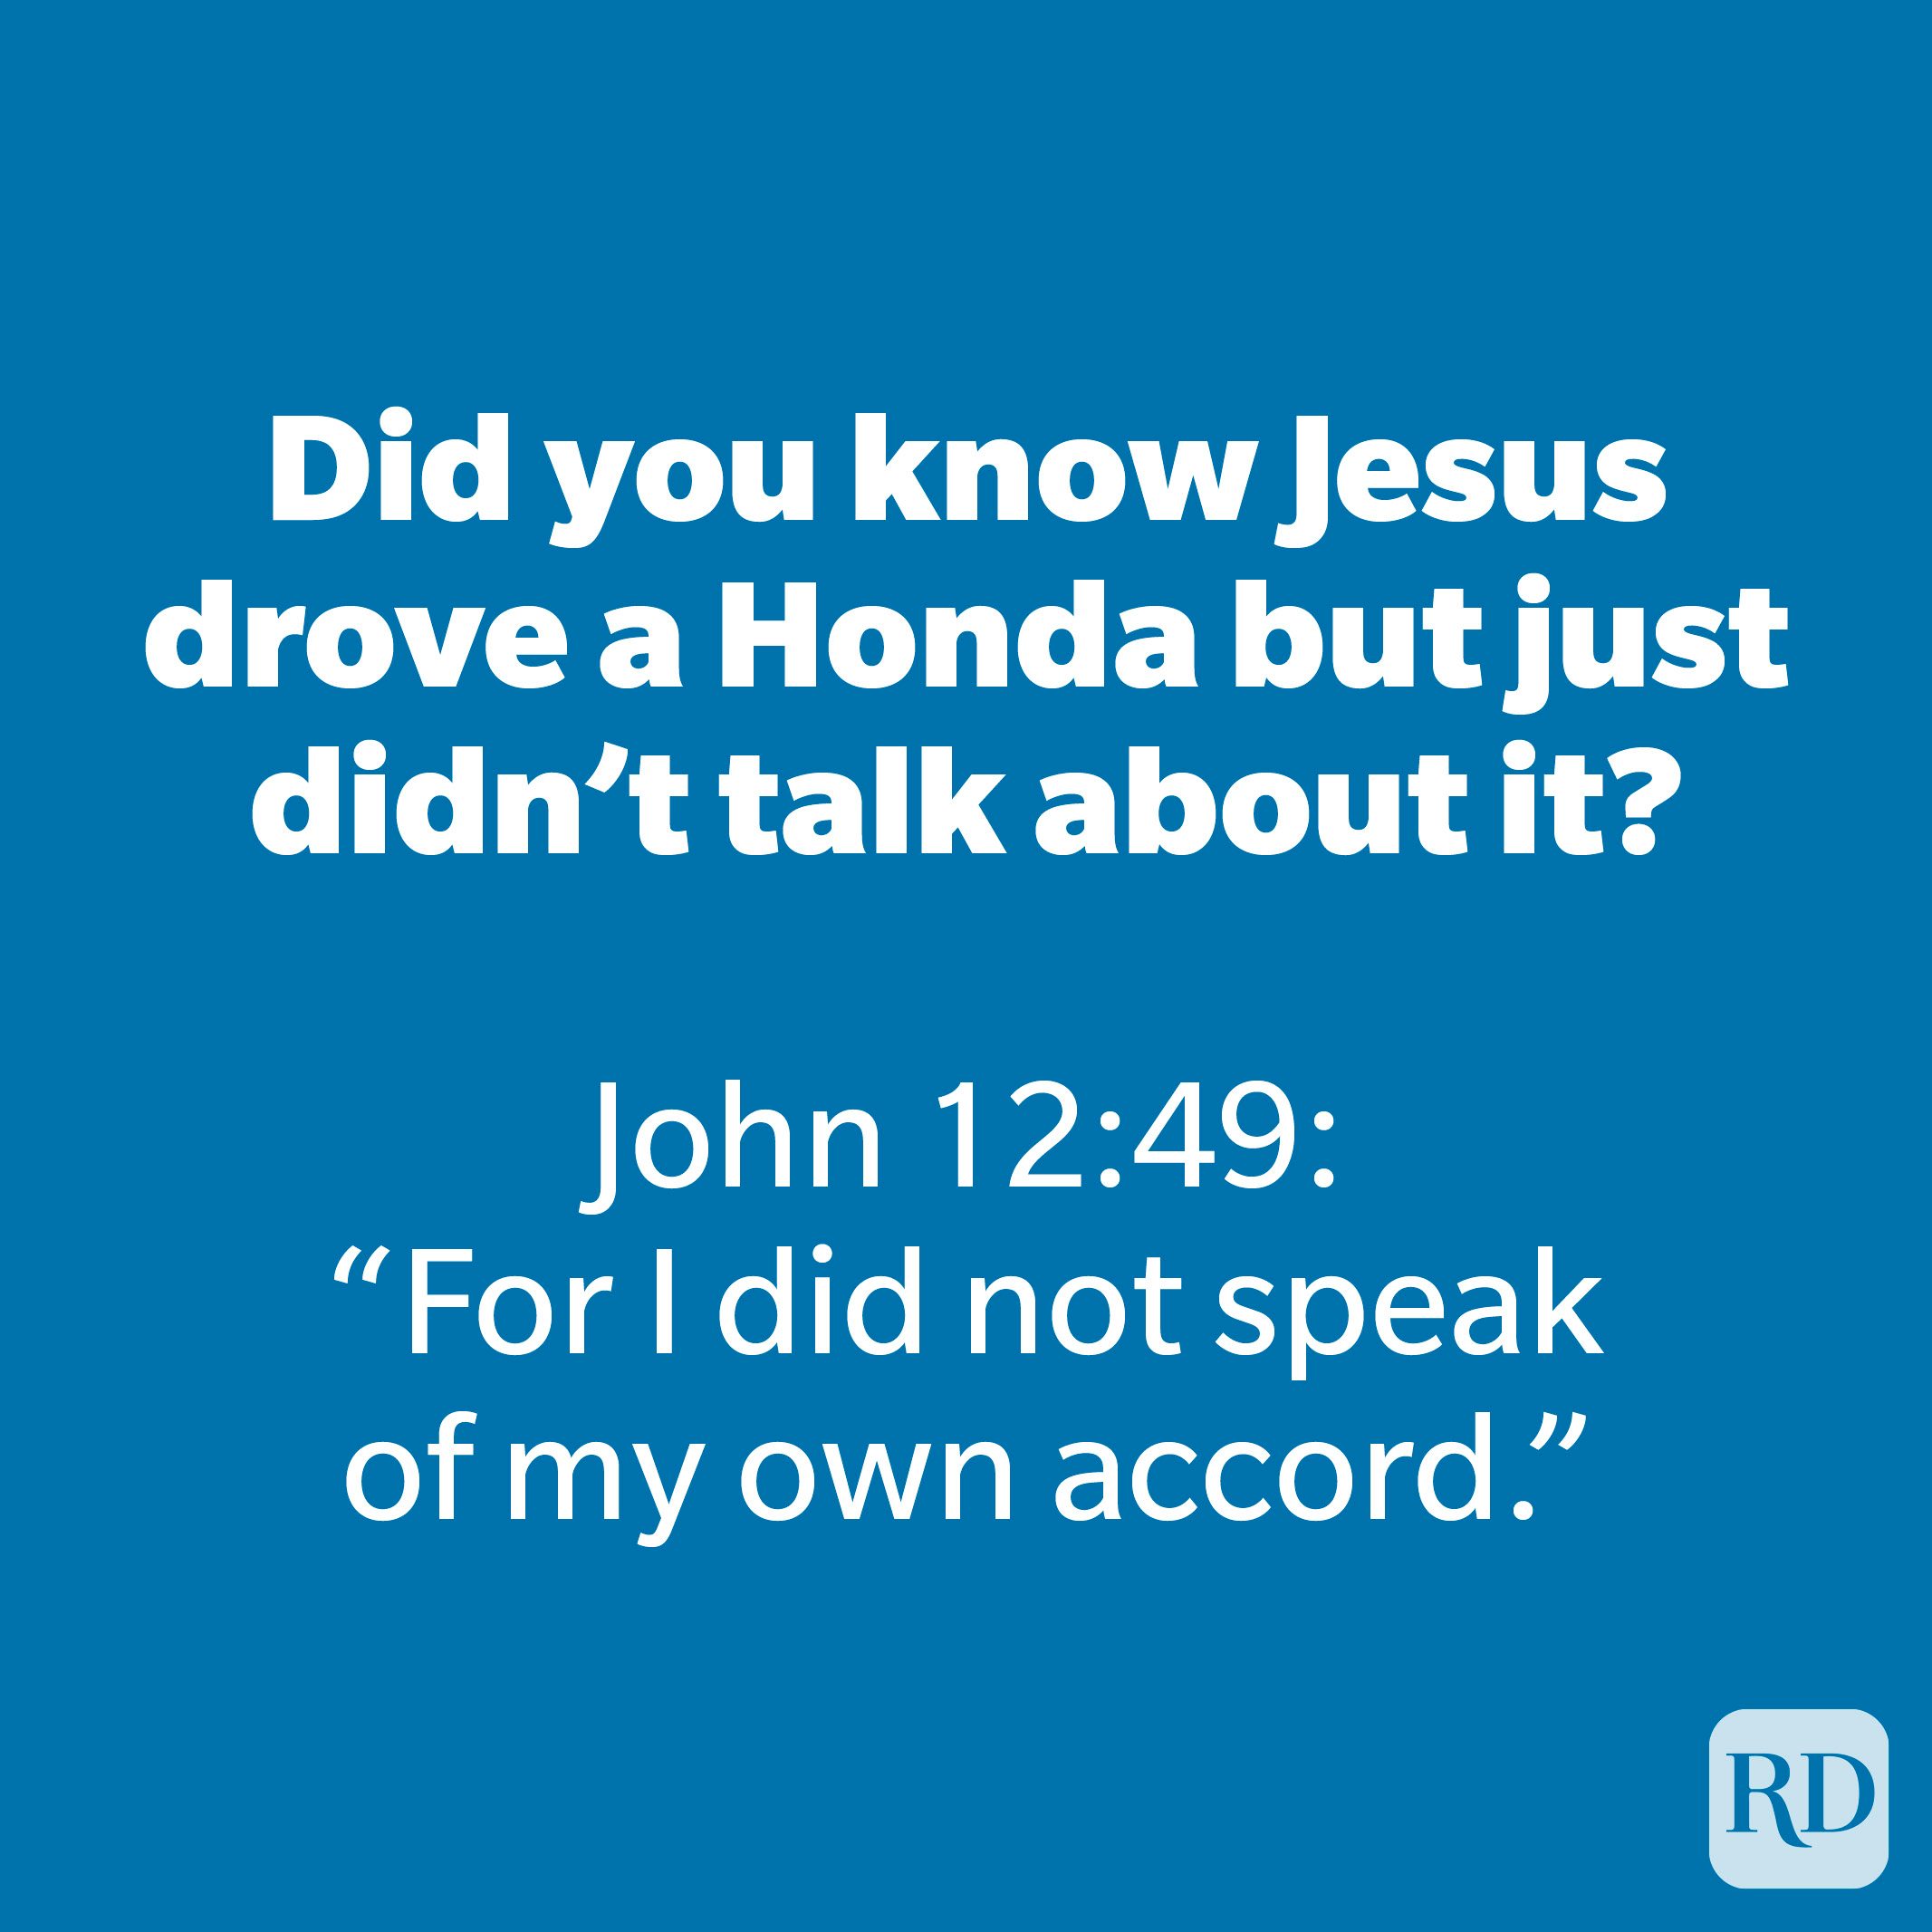 Did you know Jesus drove a Honda but just didn't talk about it?